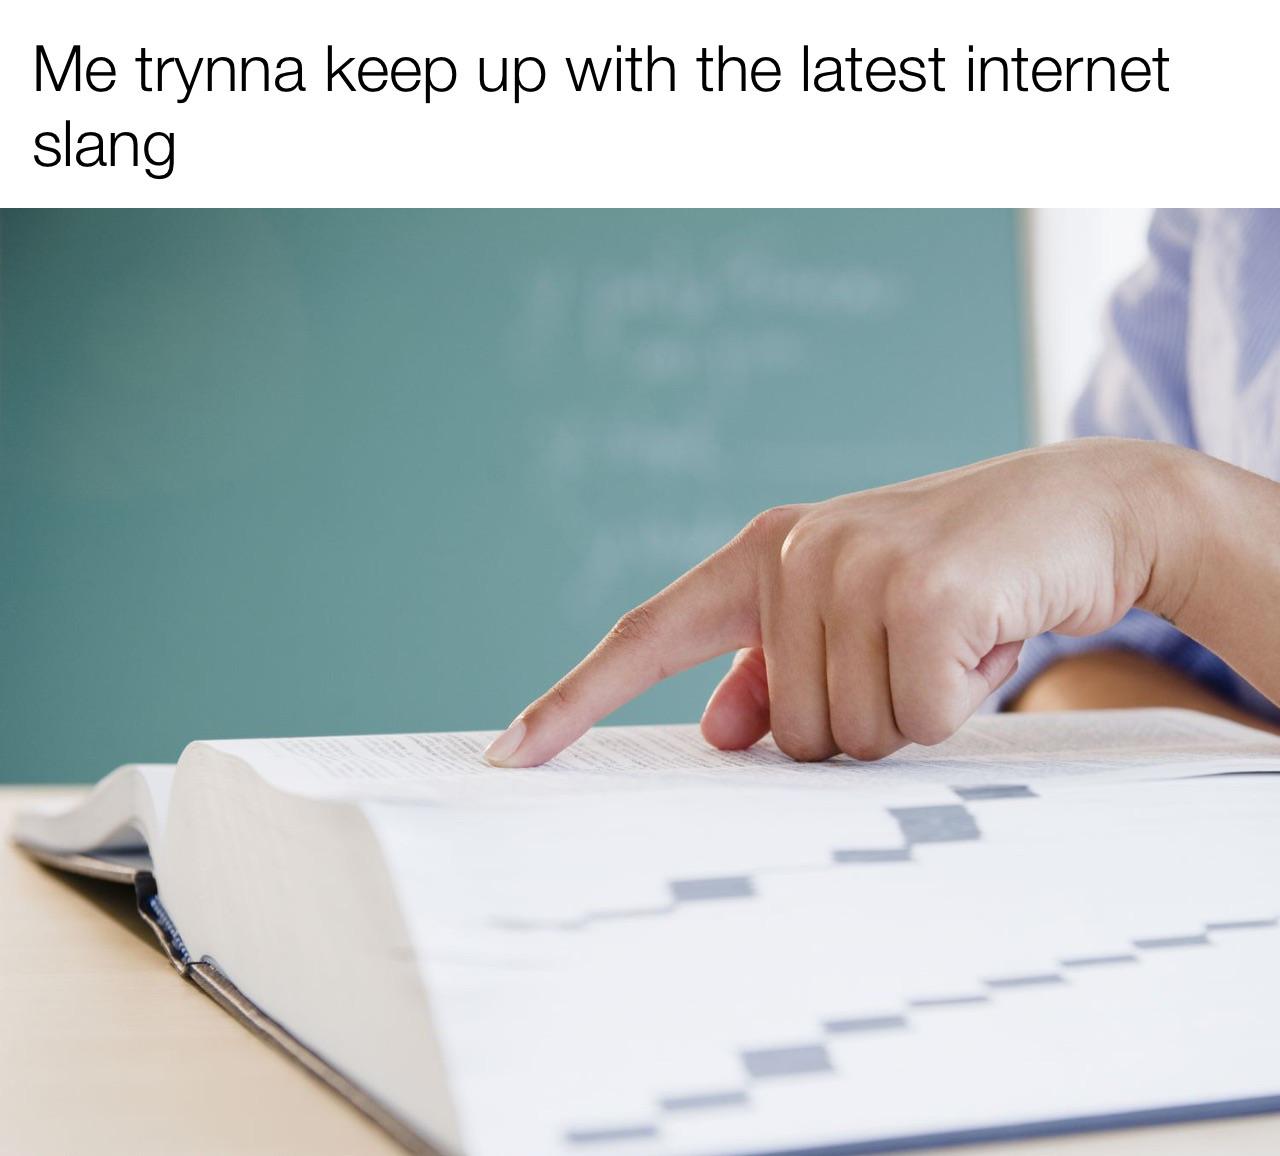 funny memes - Dictionary - Me trynna keep up with the latest internet slang